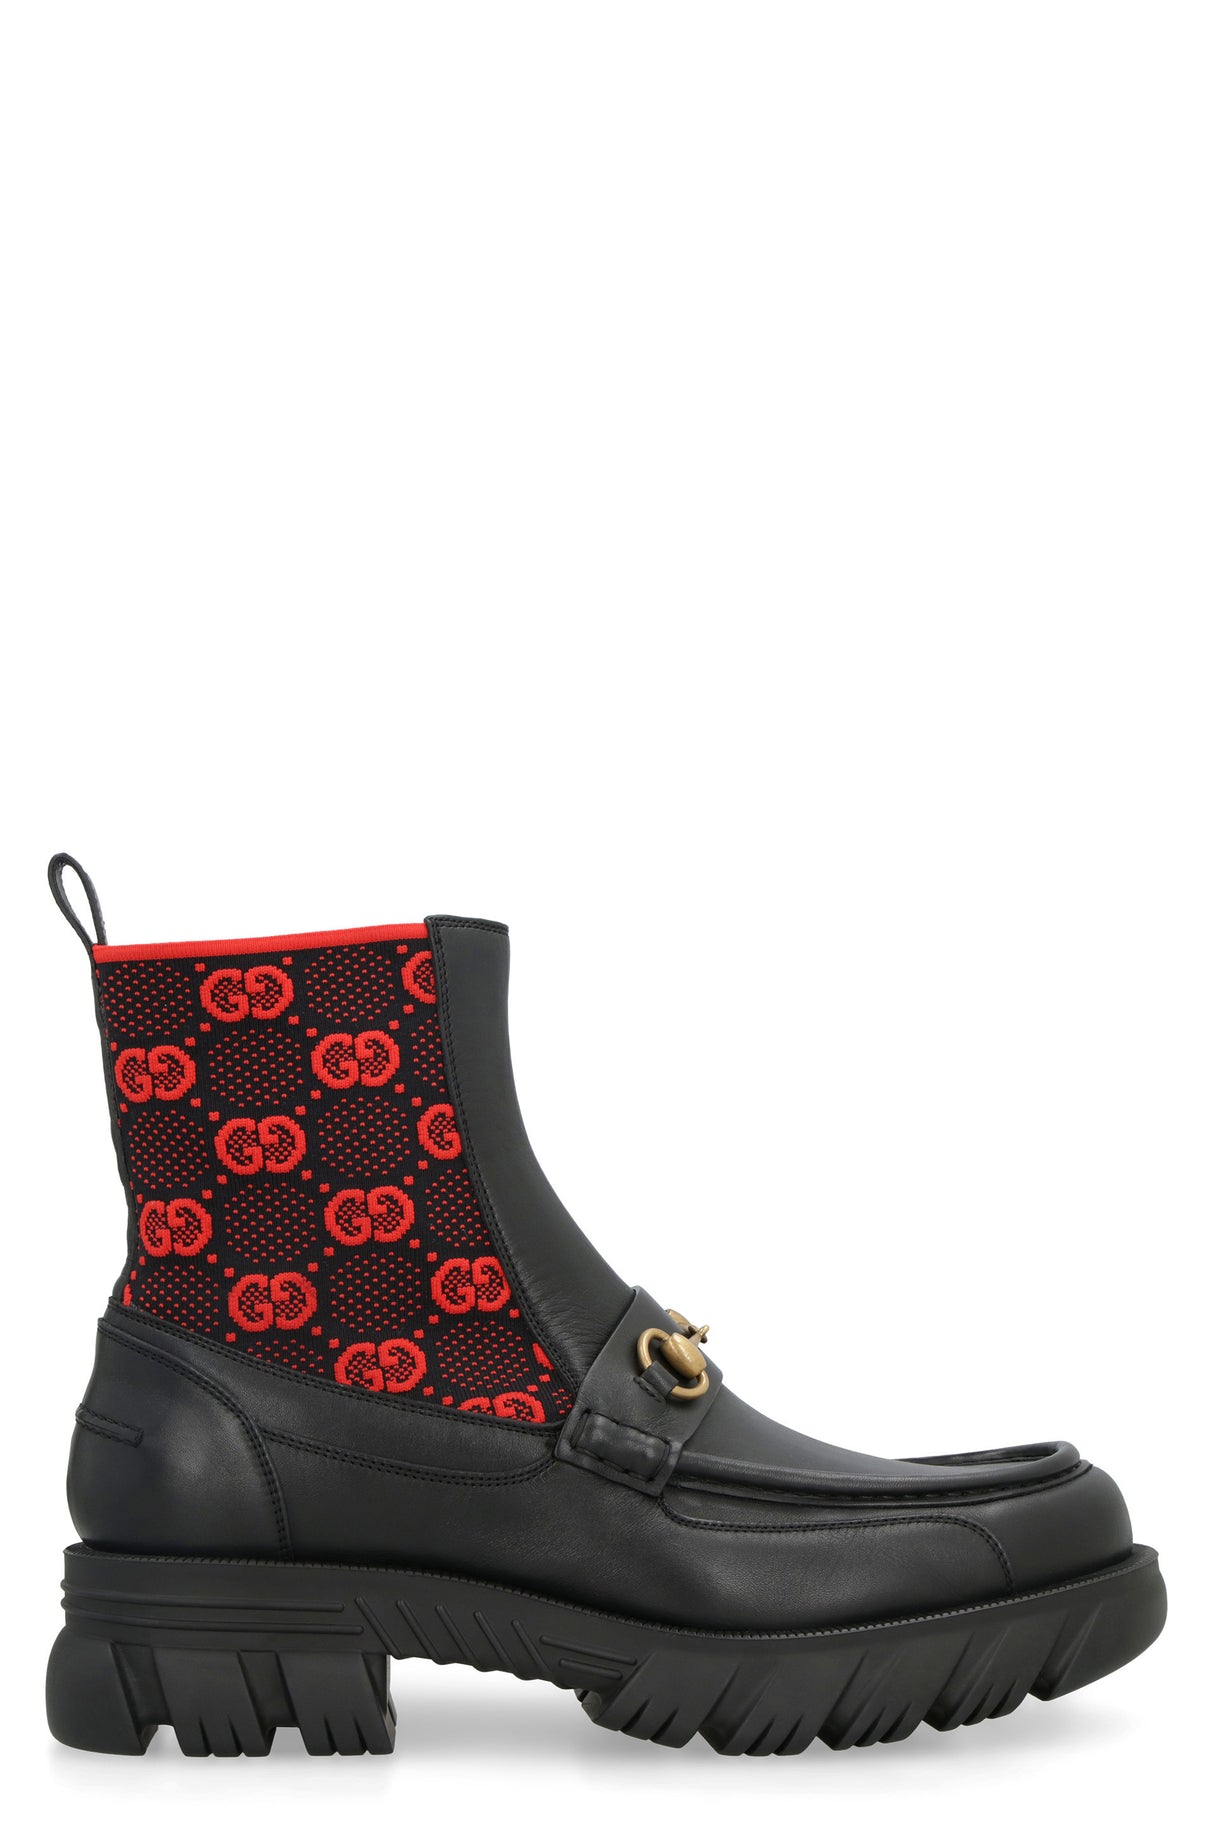 GUCCI Men's Black Leather Booties with GG Logo and Horsebit Detail